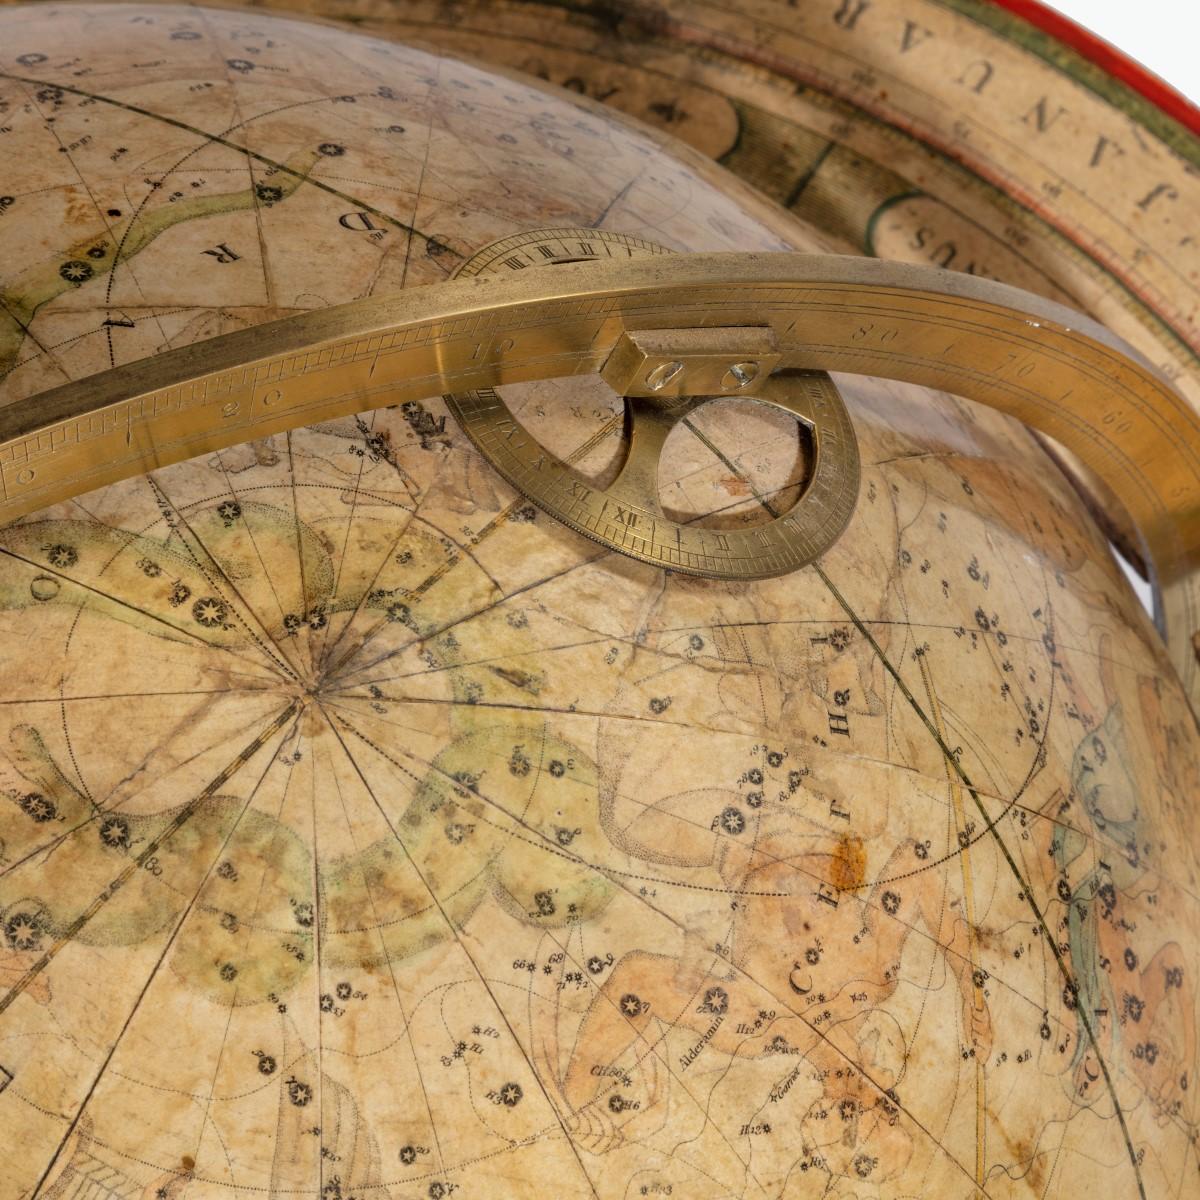 A pair of Cary’s 15-inch table globes, each set into an ebony stand with four turned legs and stretchers, the terrestrial stating “Cary’s New Terrestrial Globe exhibiting the tracks and discoveries made by Captain Cook and those of Captain Vancouver